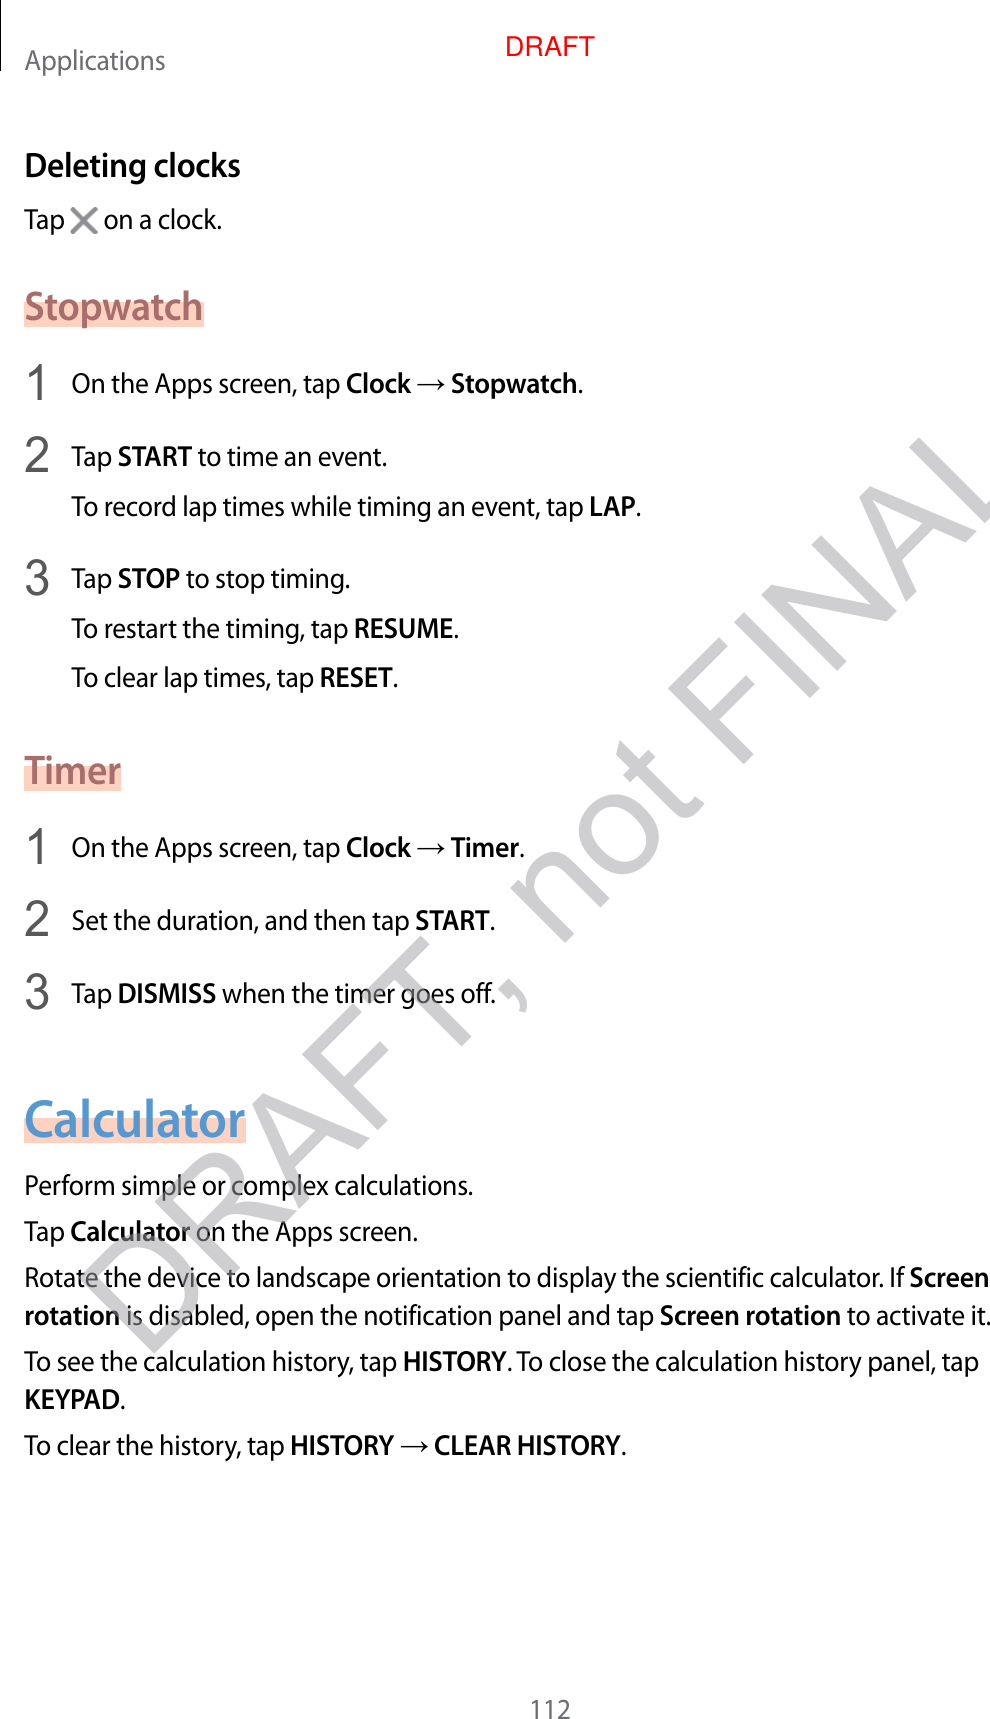 Applications112Deleting clocksTap   on a clock.Stopwatch1  On the Apps screen, tap Clock  Stopwatch.2  Tap START to time an even t.To recor d lap times while timing an ev en t, tap LAP.3  Tap STOP to stop timing .To restart the timing, tap RESUME.To clear lap times, tap RESET.Timer1  On the Apps screen, tap Clock  Timer.2  Set the duration, and then tap START.3  Tap DISMISS when the timer goes off.CalculatorP erform simple or complex calculations .Tap Calculator on the Apps screen.Rotate the device t o landscape orientation t o display the scien tific calculat or. If Screen rotation is disabled, open the notification panel and tap Screen rota tion to activate it.To see the calculation history , tap HISTORY. To close the calculation history panel, tap KEYPAD.To clear the history, tap HISTORY  CLEAR HISTORY.DRAFT, not FINALDRAFT